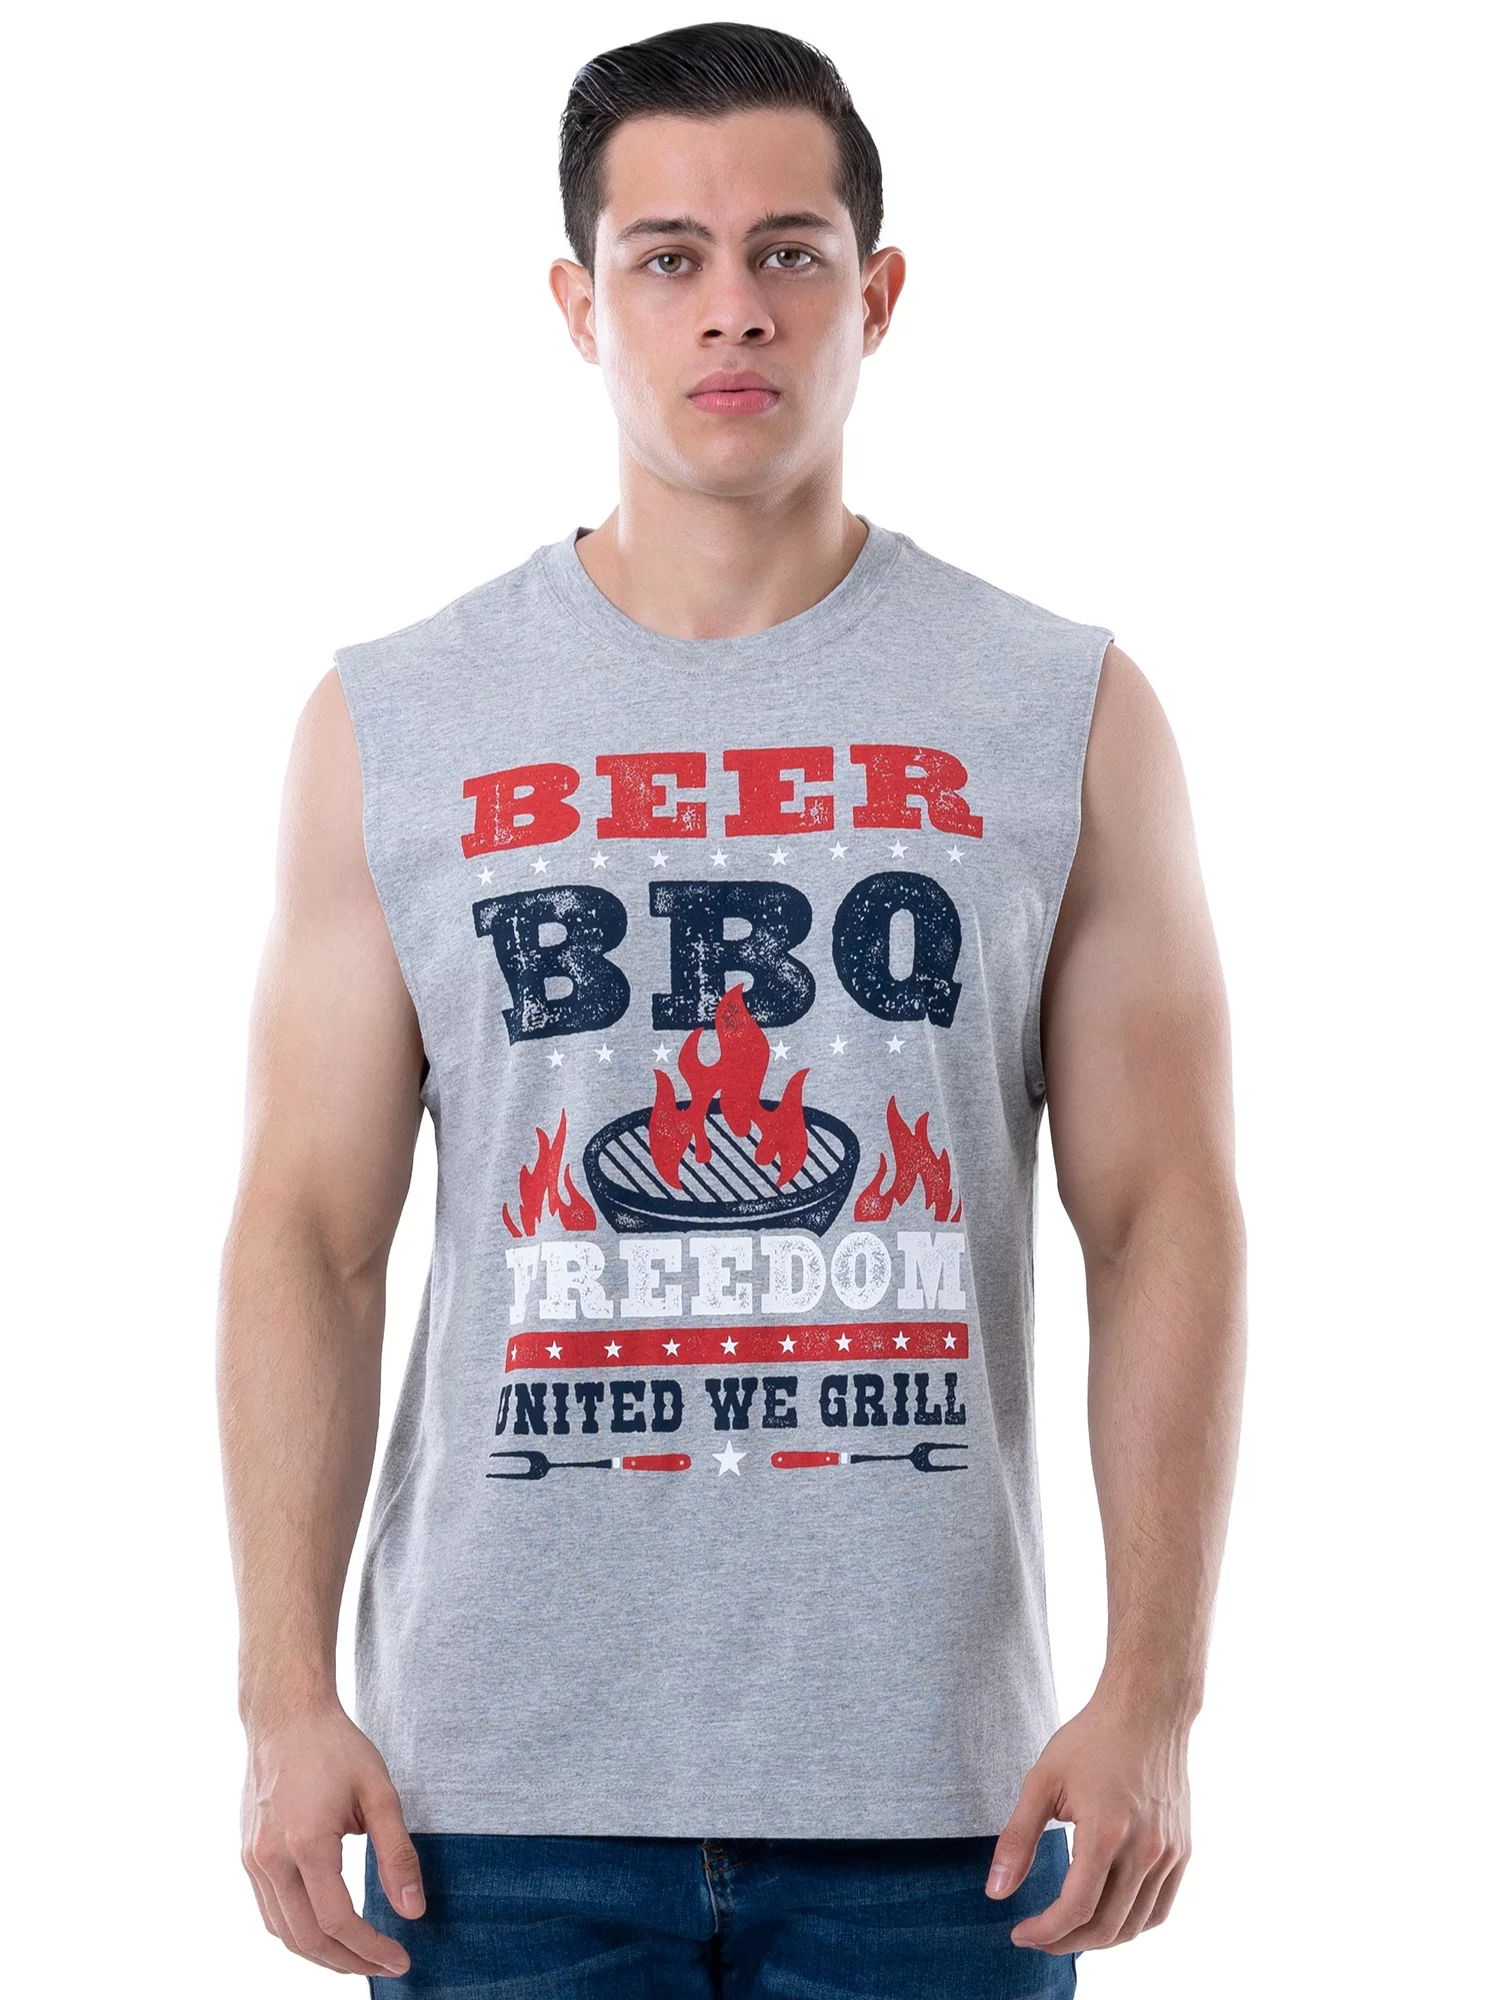 Way To Celebrate Men's Americana Graphic Muscle Tank Top, Sizes S-3XL